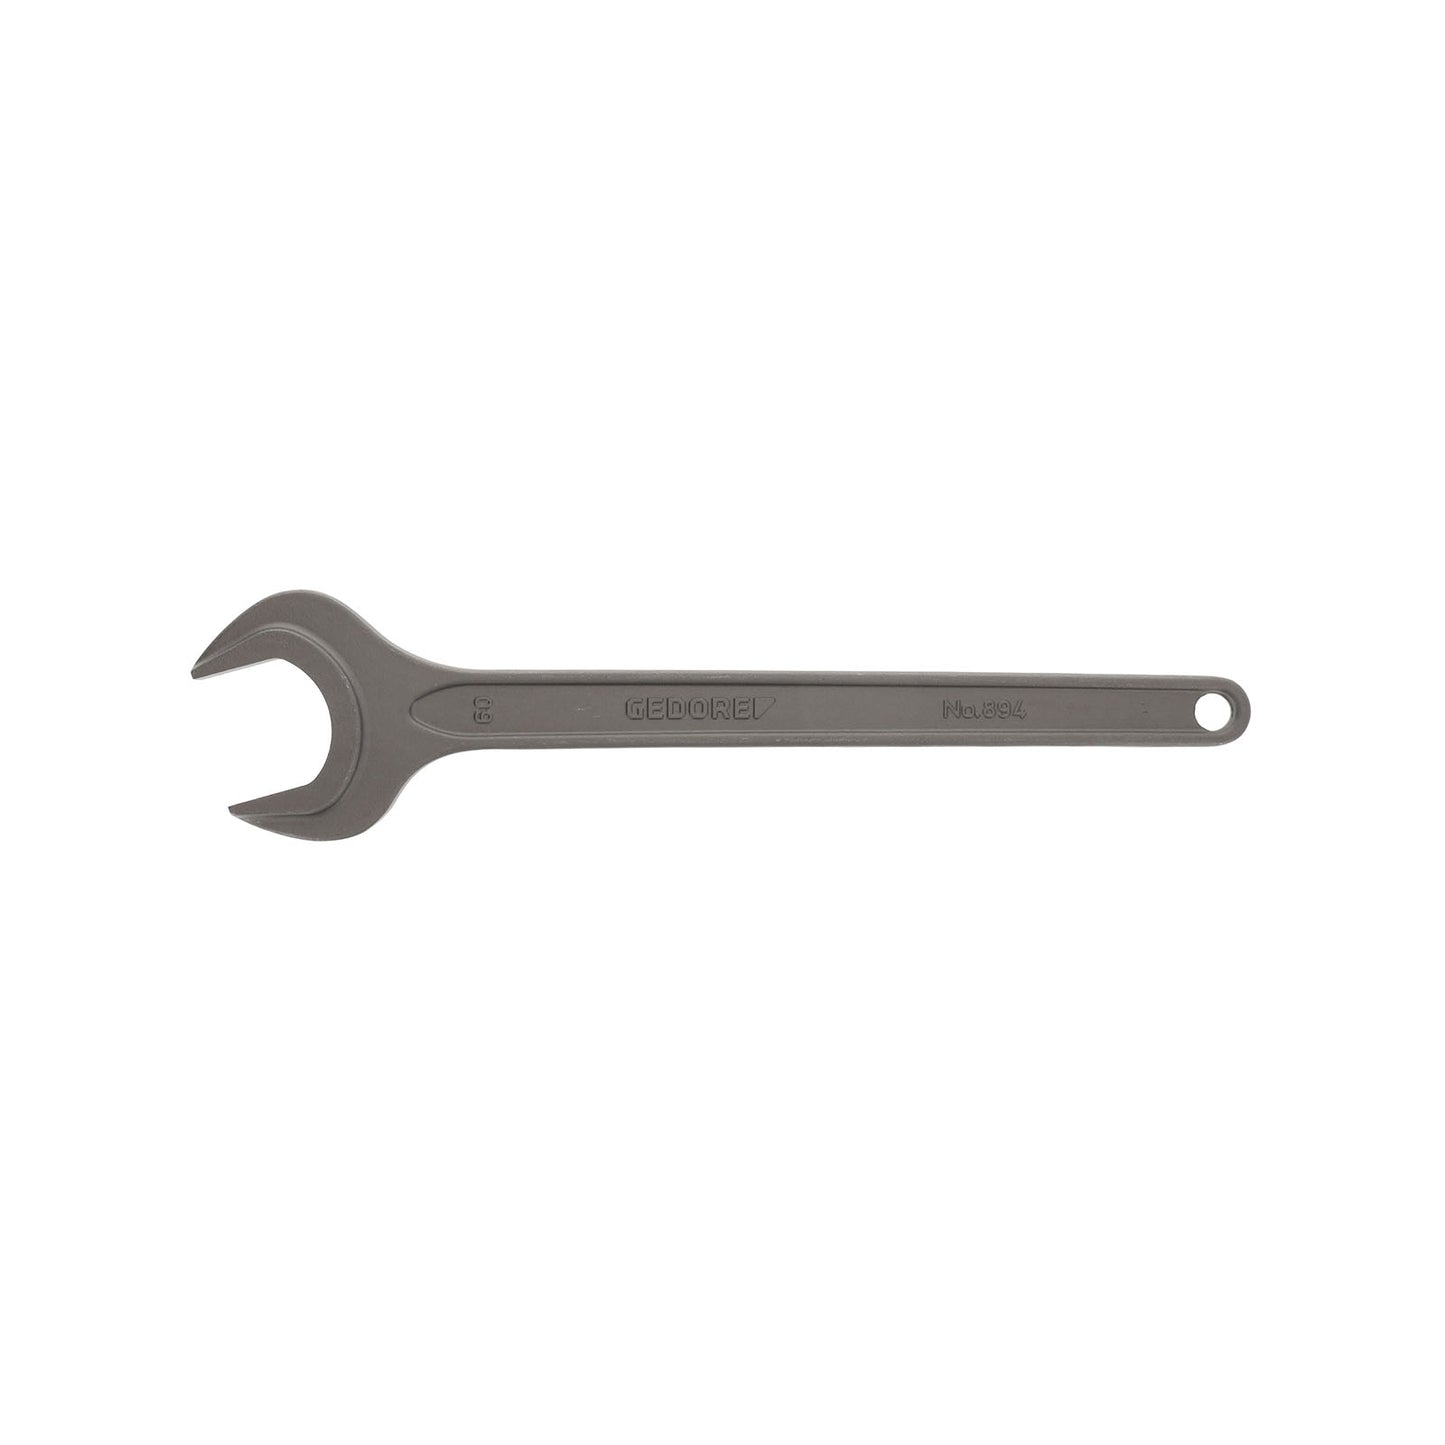 GEDORE 894 60 - 1 Open End Wrench, 60mm (6577350)